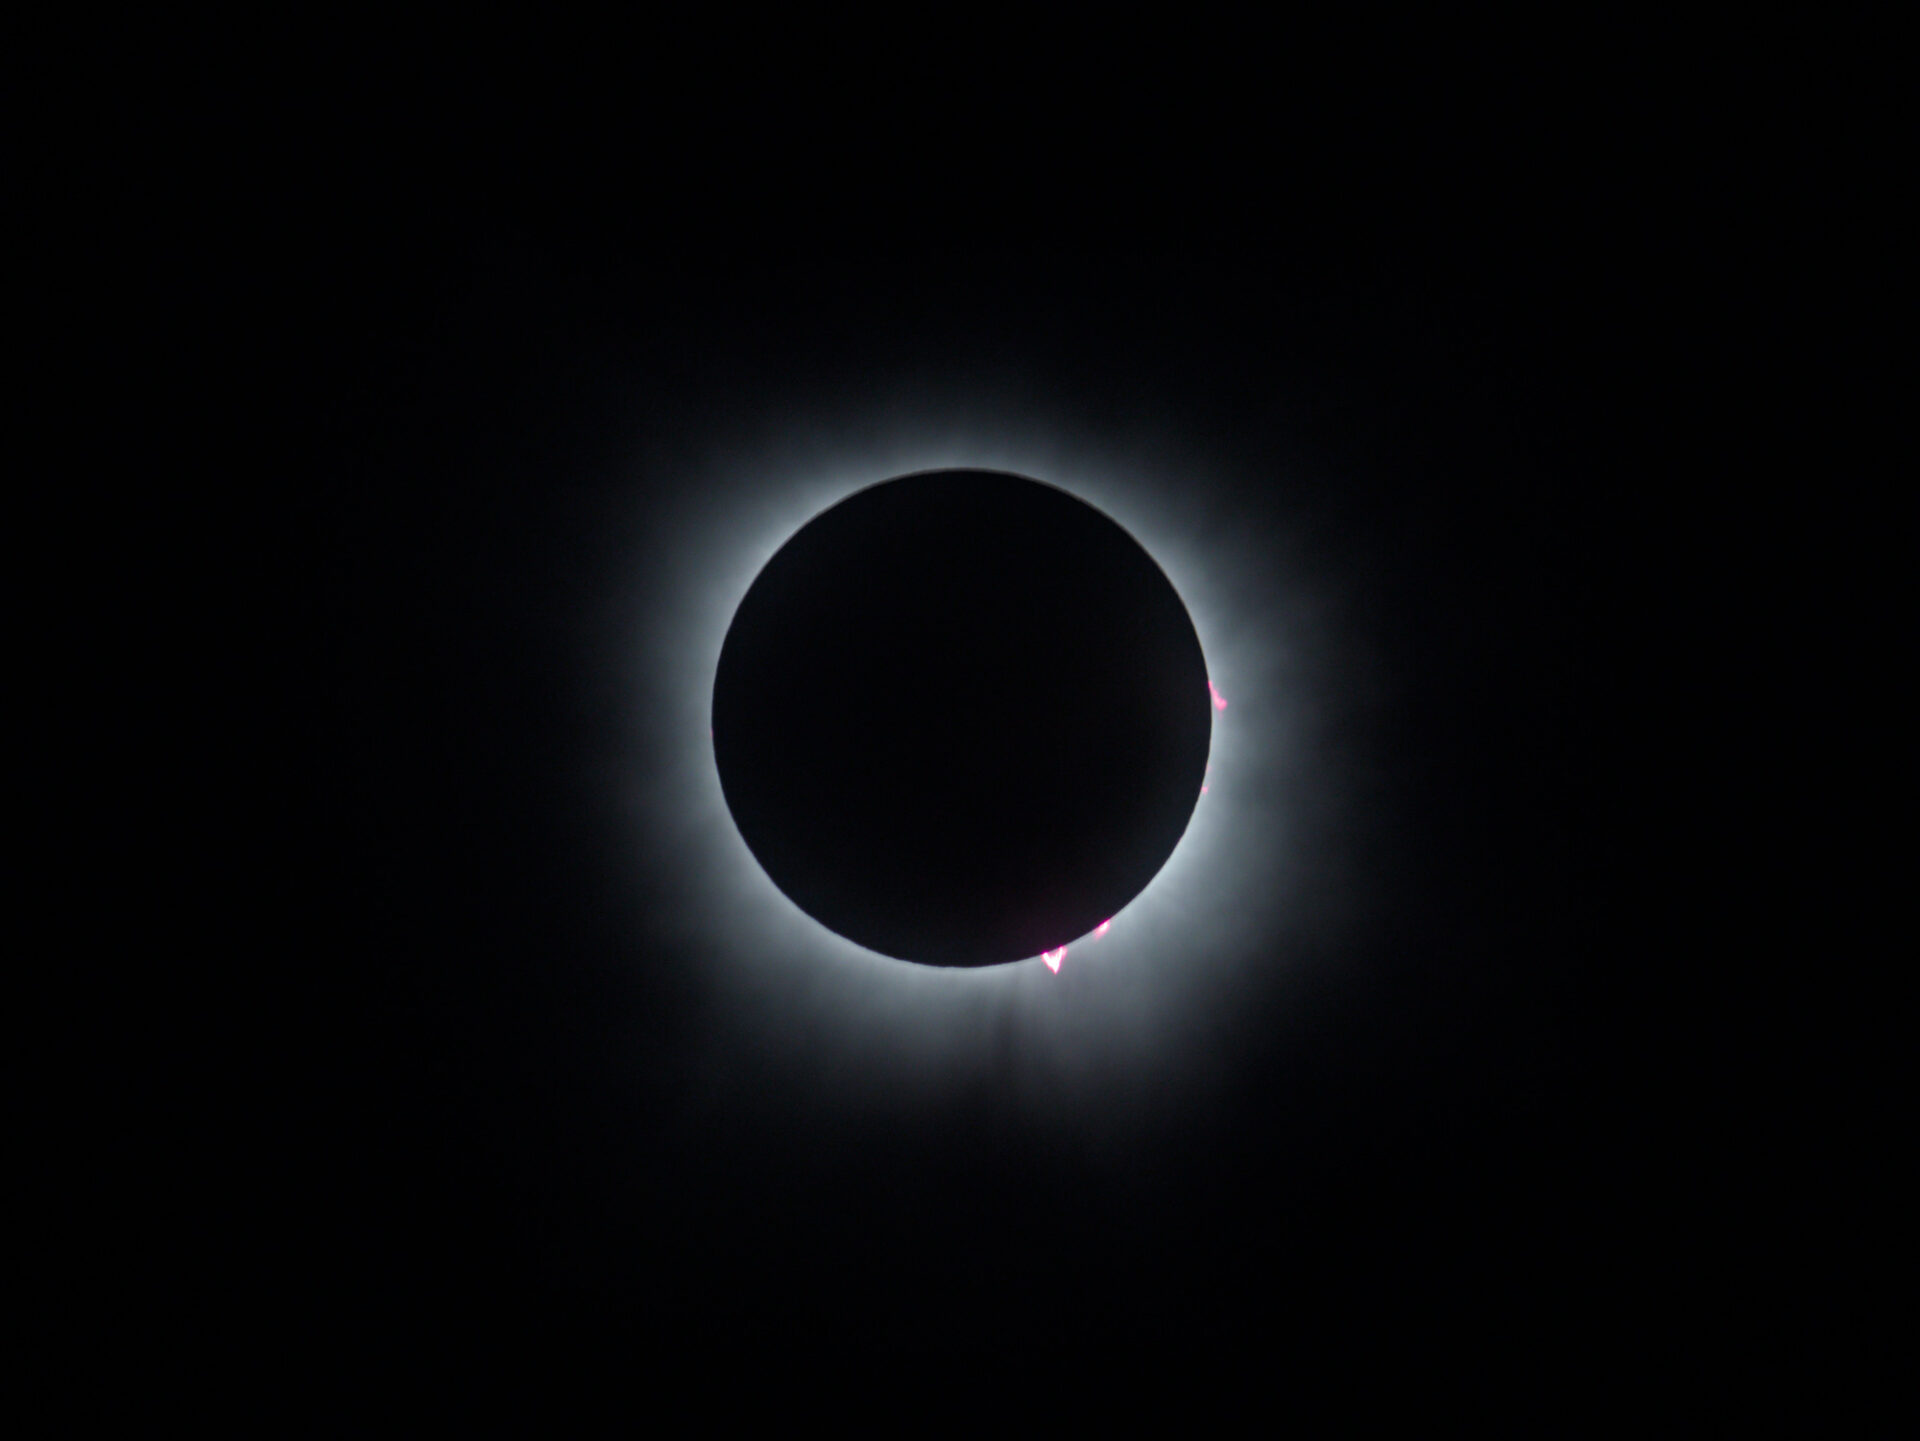 A total eclipse of the sun with visible corona and three reddish prominances